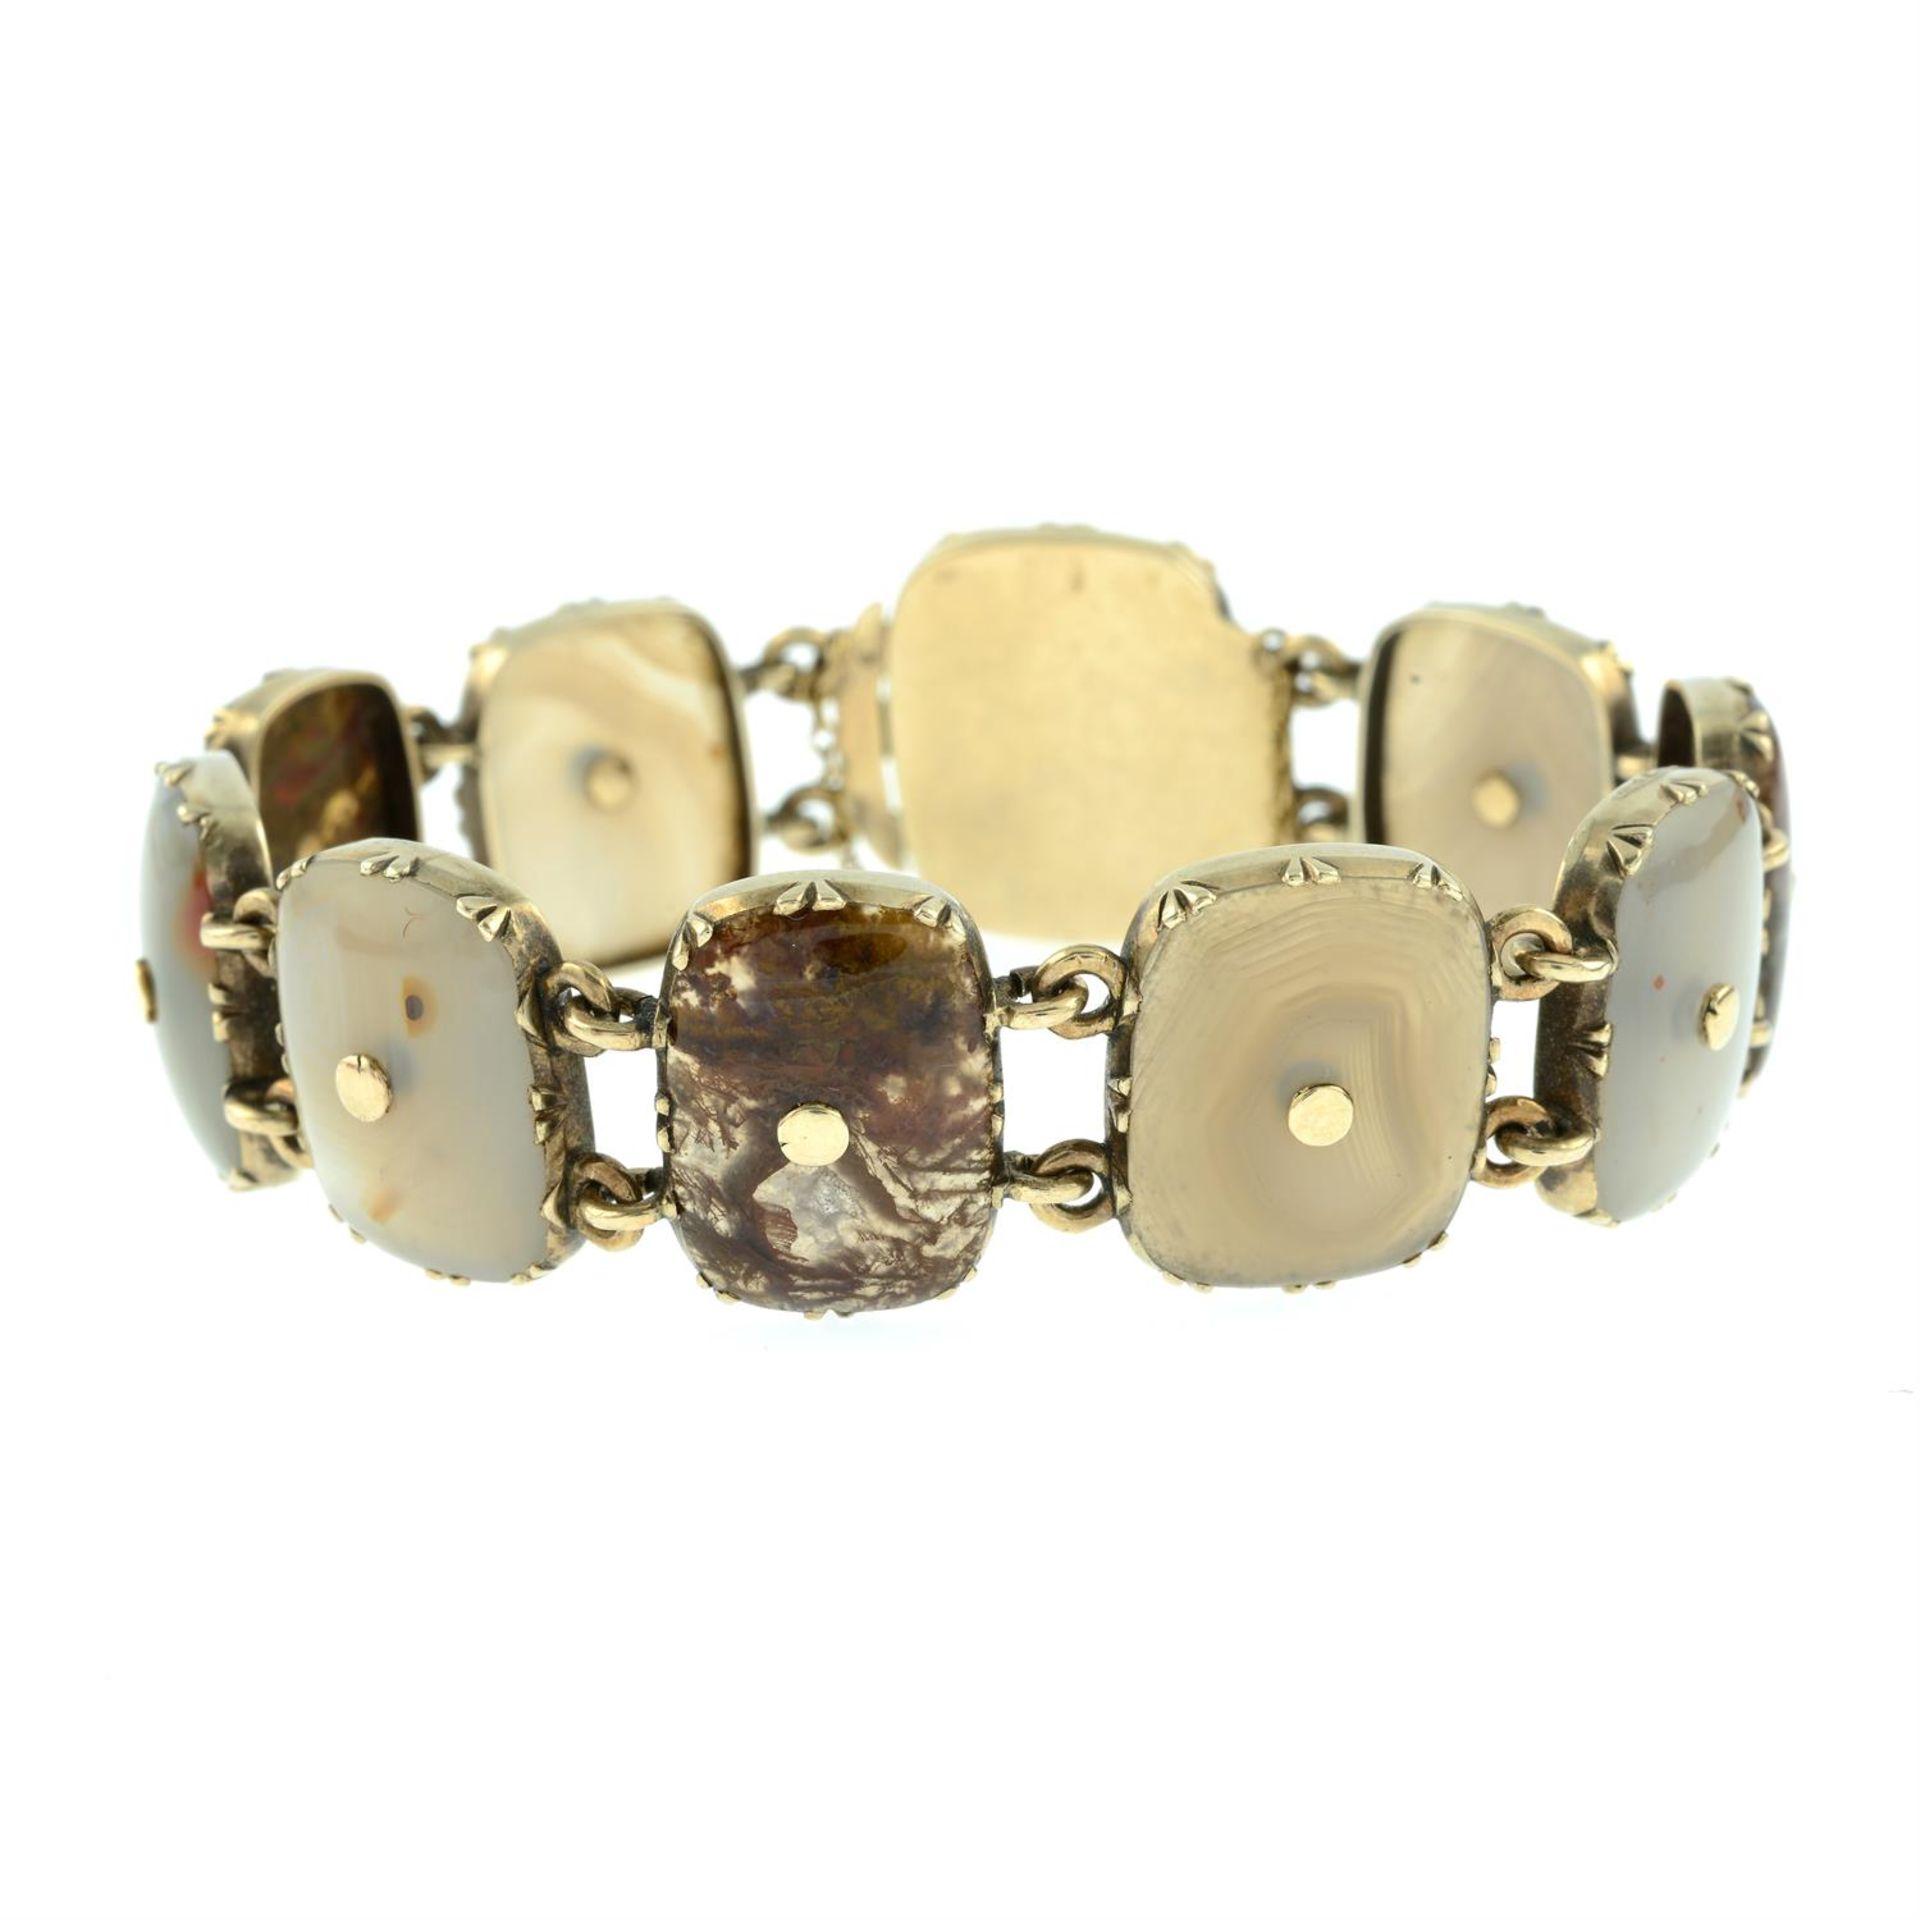 An early to mid 19th century gold Scottish agate bracelet. - Image 2 of 4